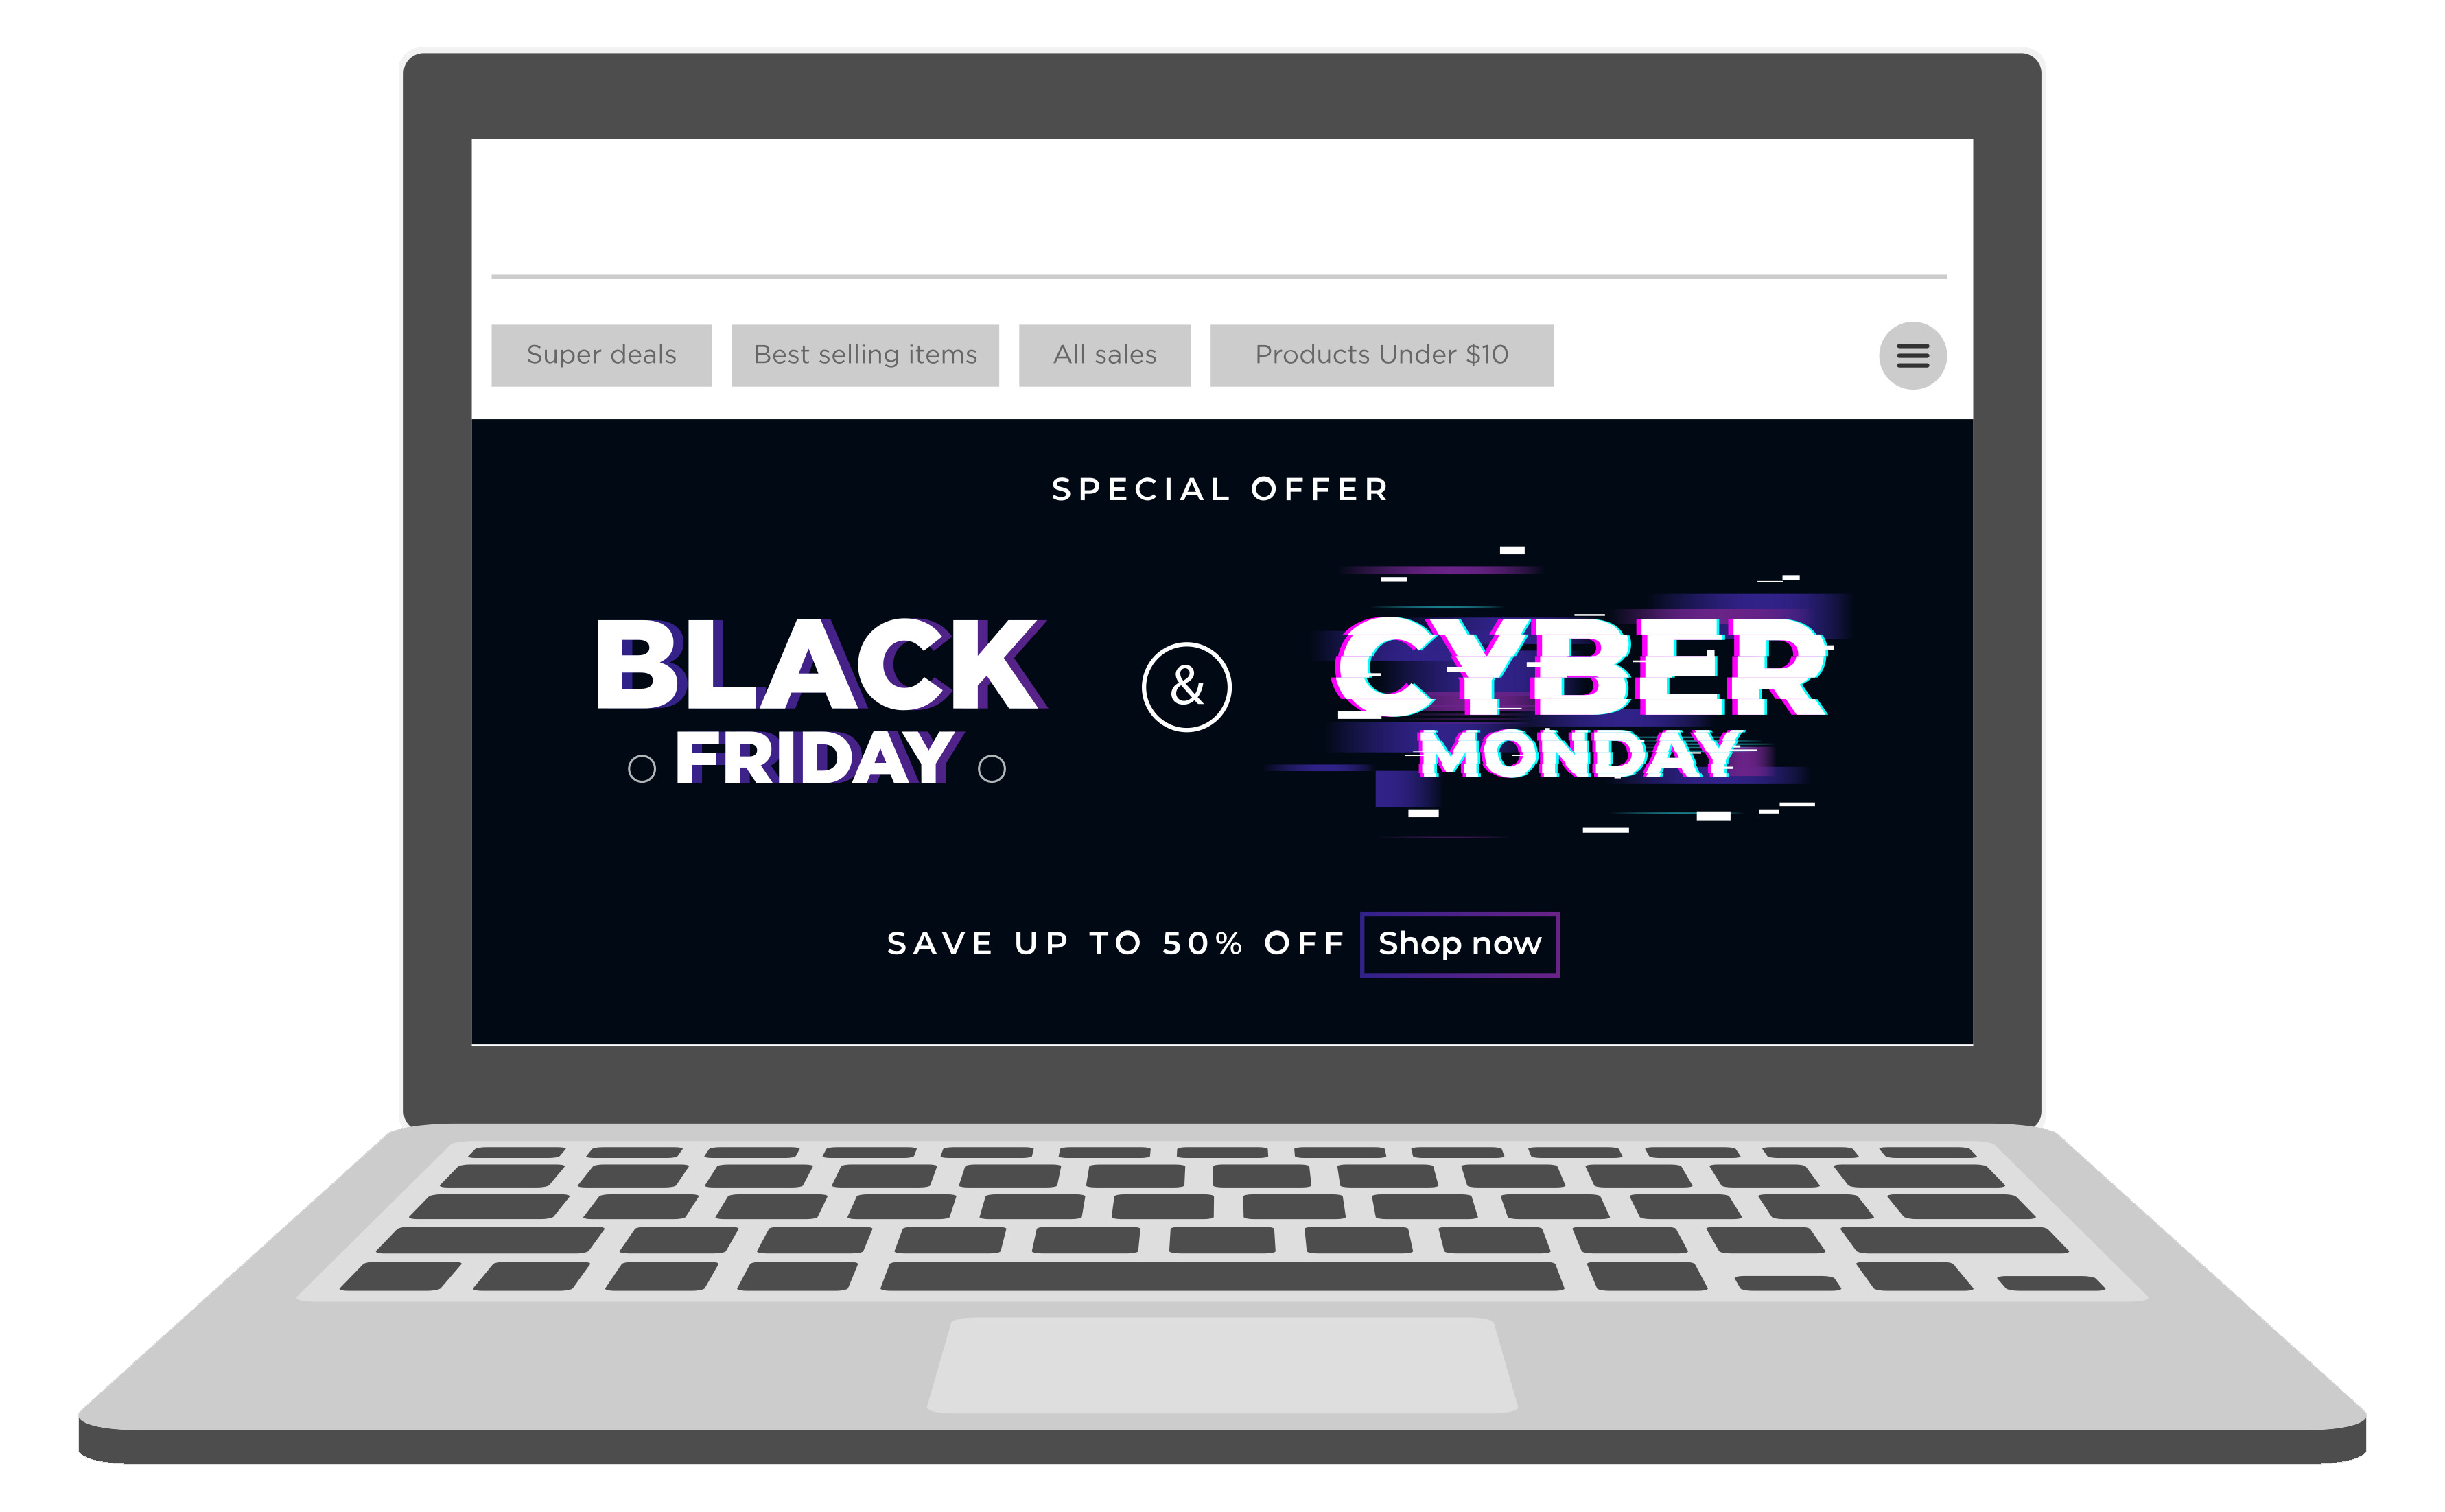 A Checklist Of 15 Steps To Get Your SaaS Company Ready For Black Friday